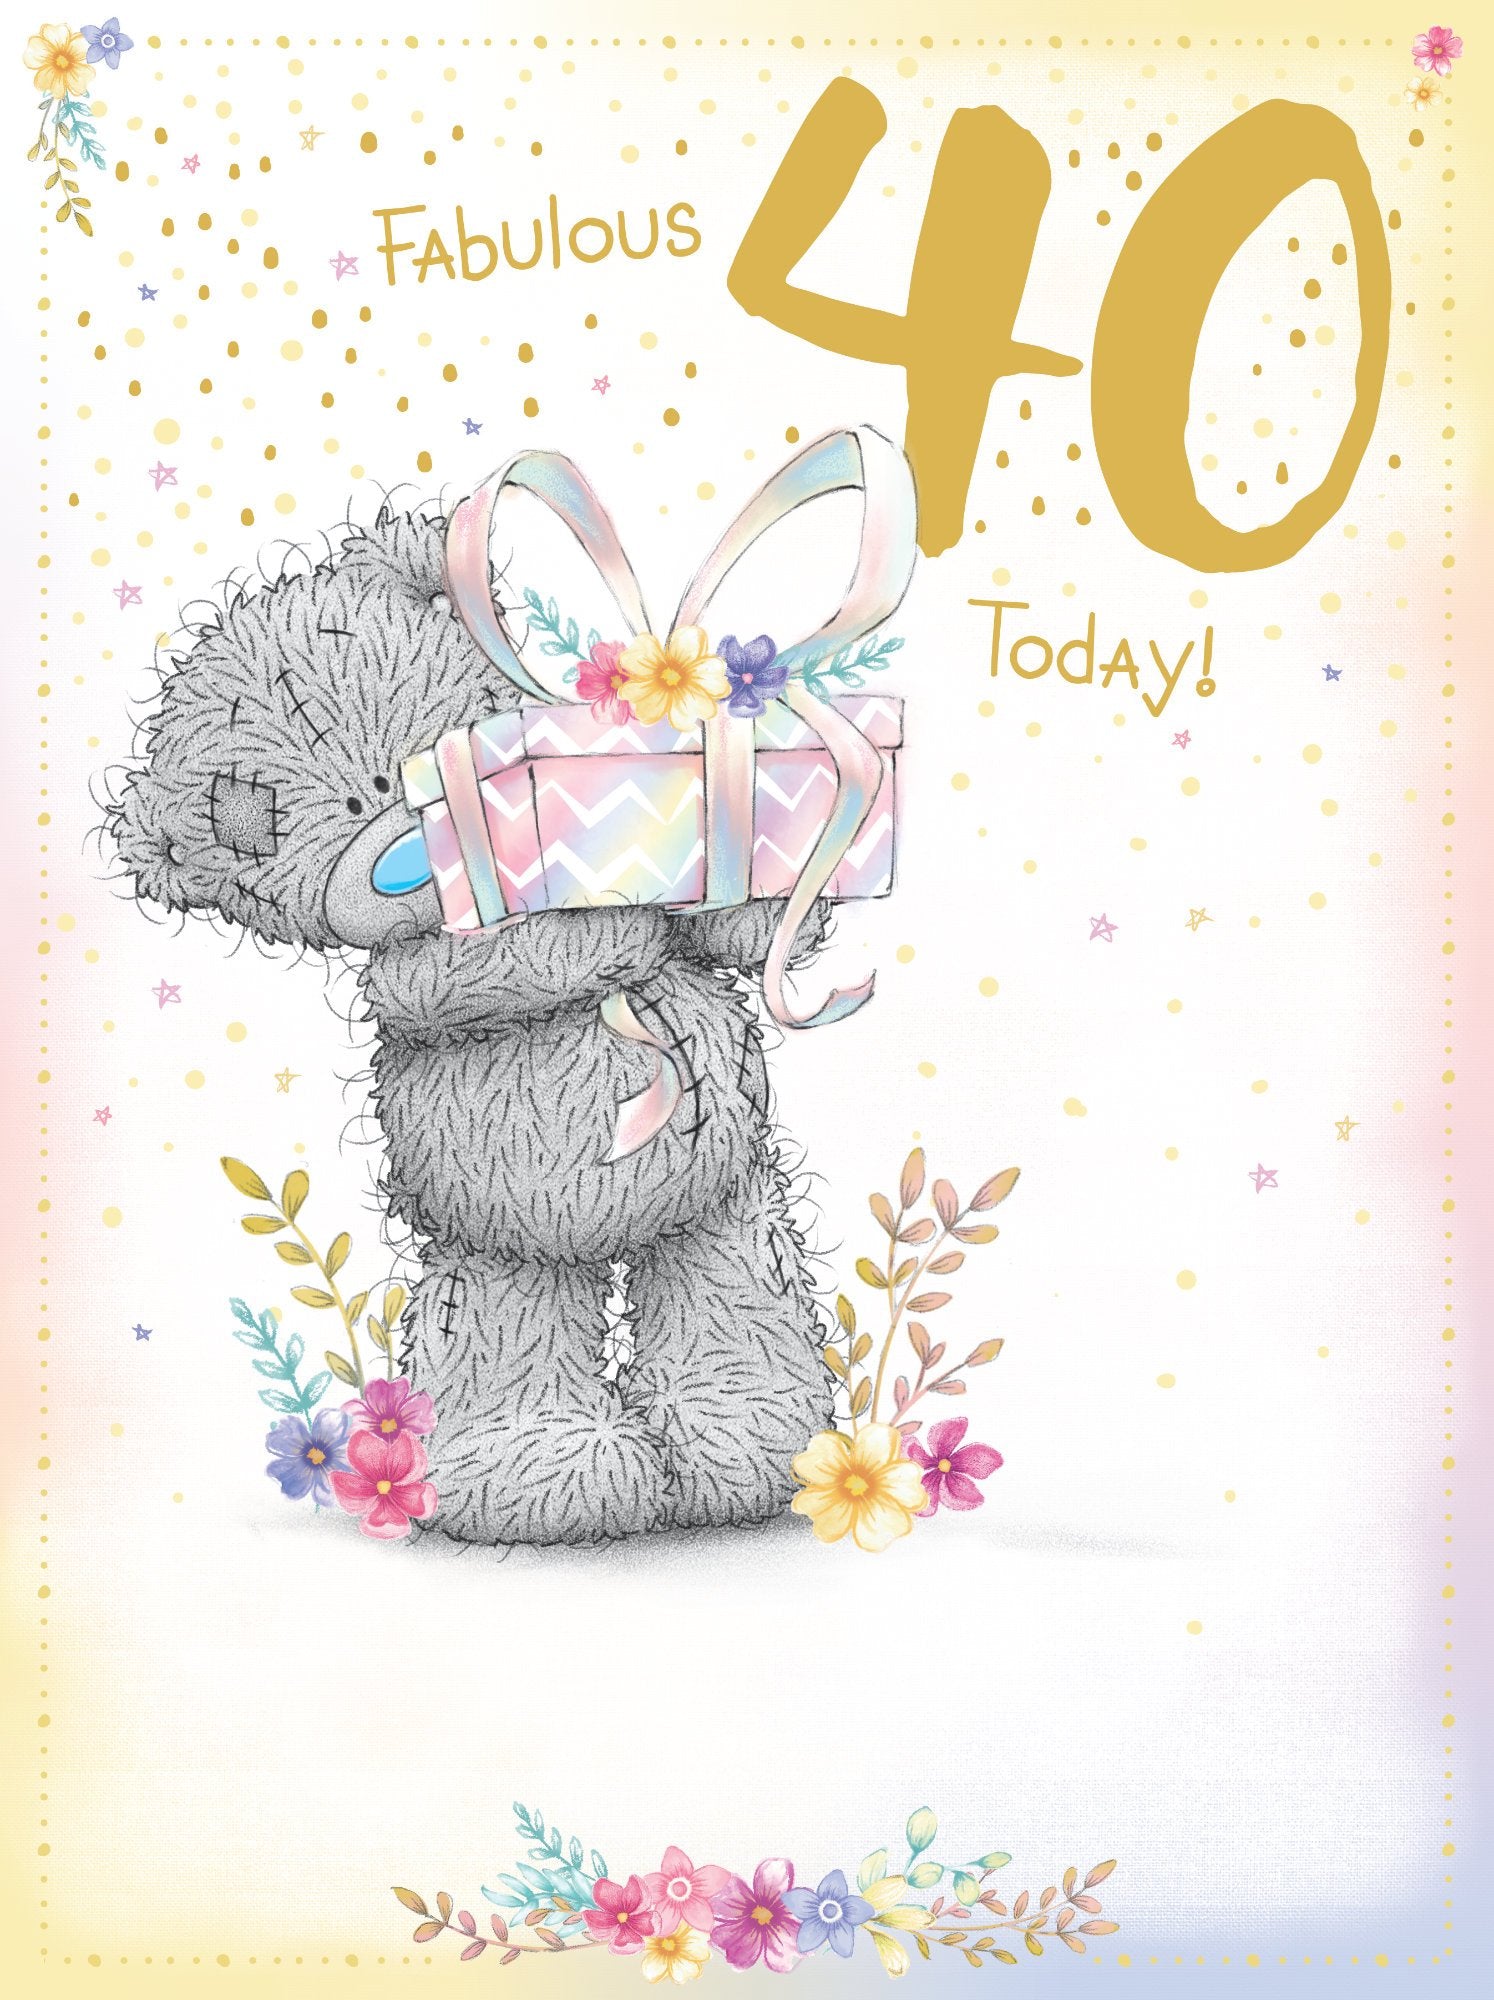 Photograph of 40th Birthday Teddy Fabulous Greetings Card at Nicole's Shop